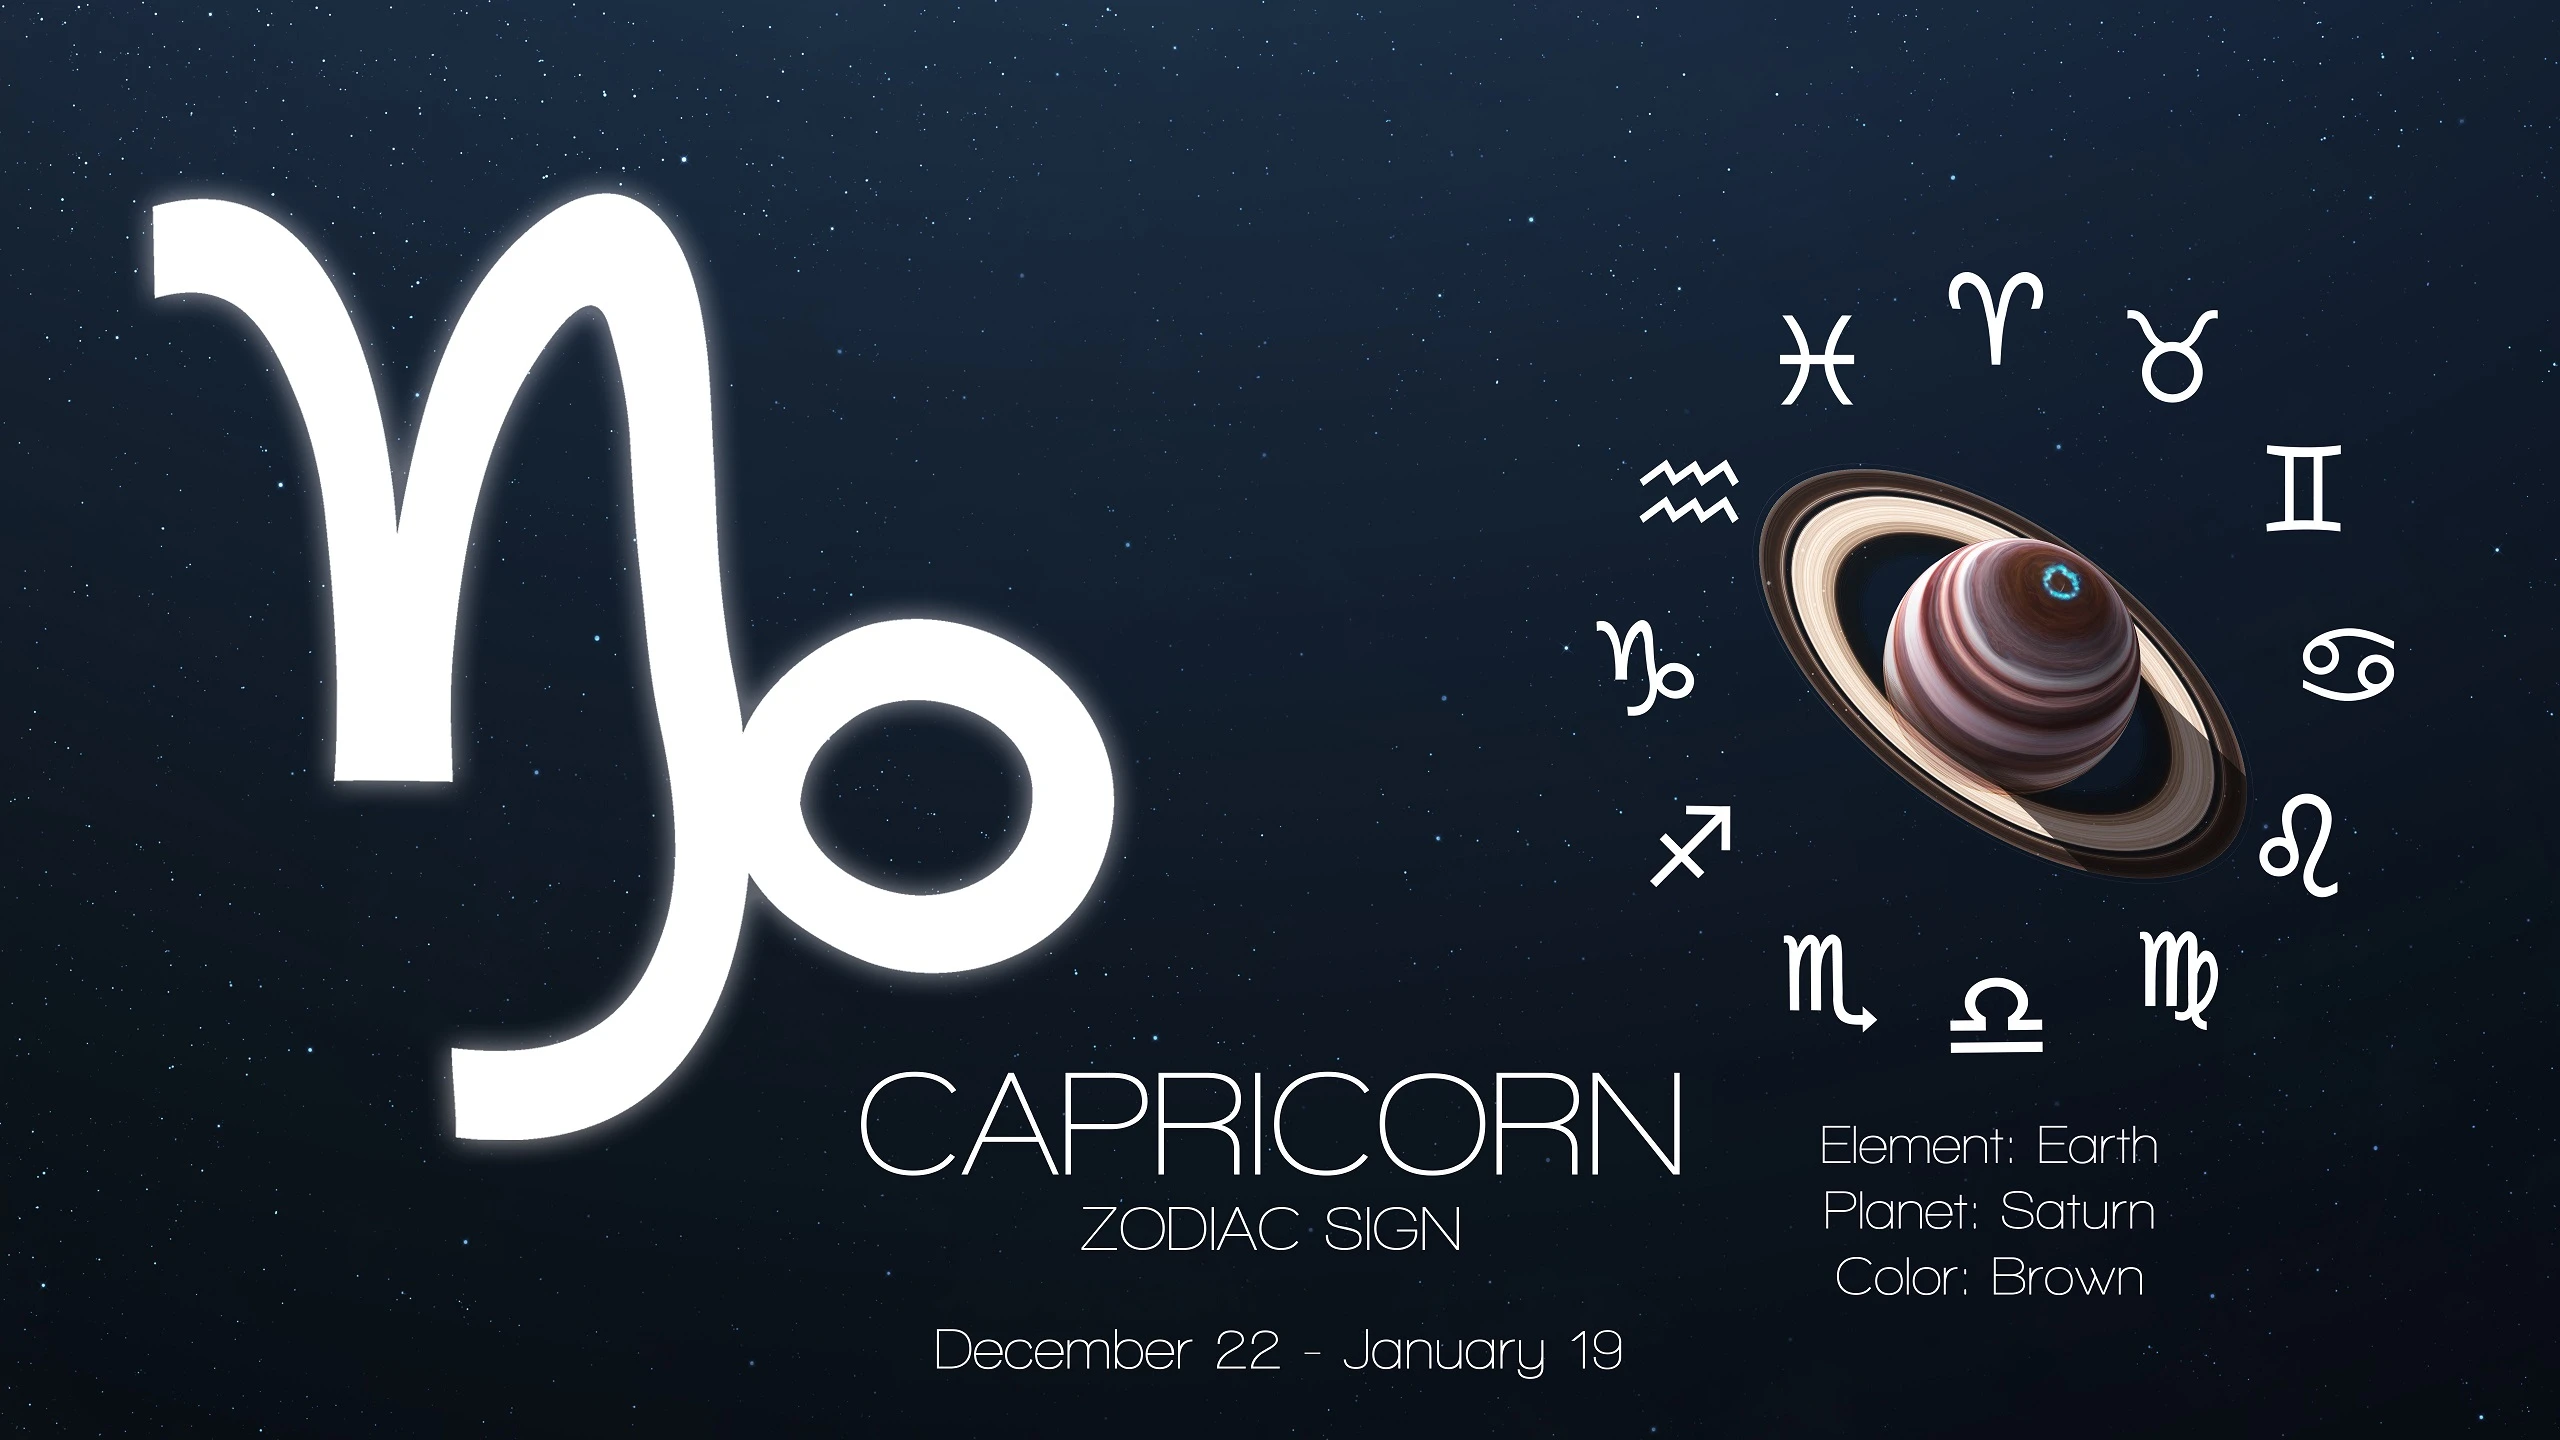 Capricorn zodiac sign facts and stats